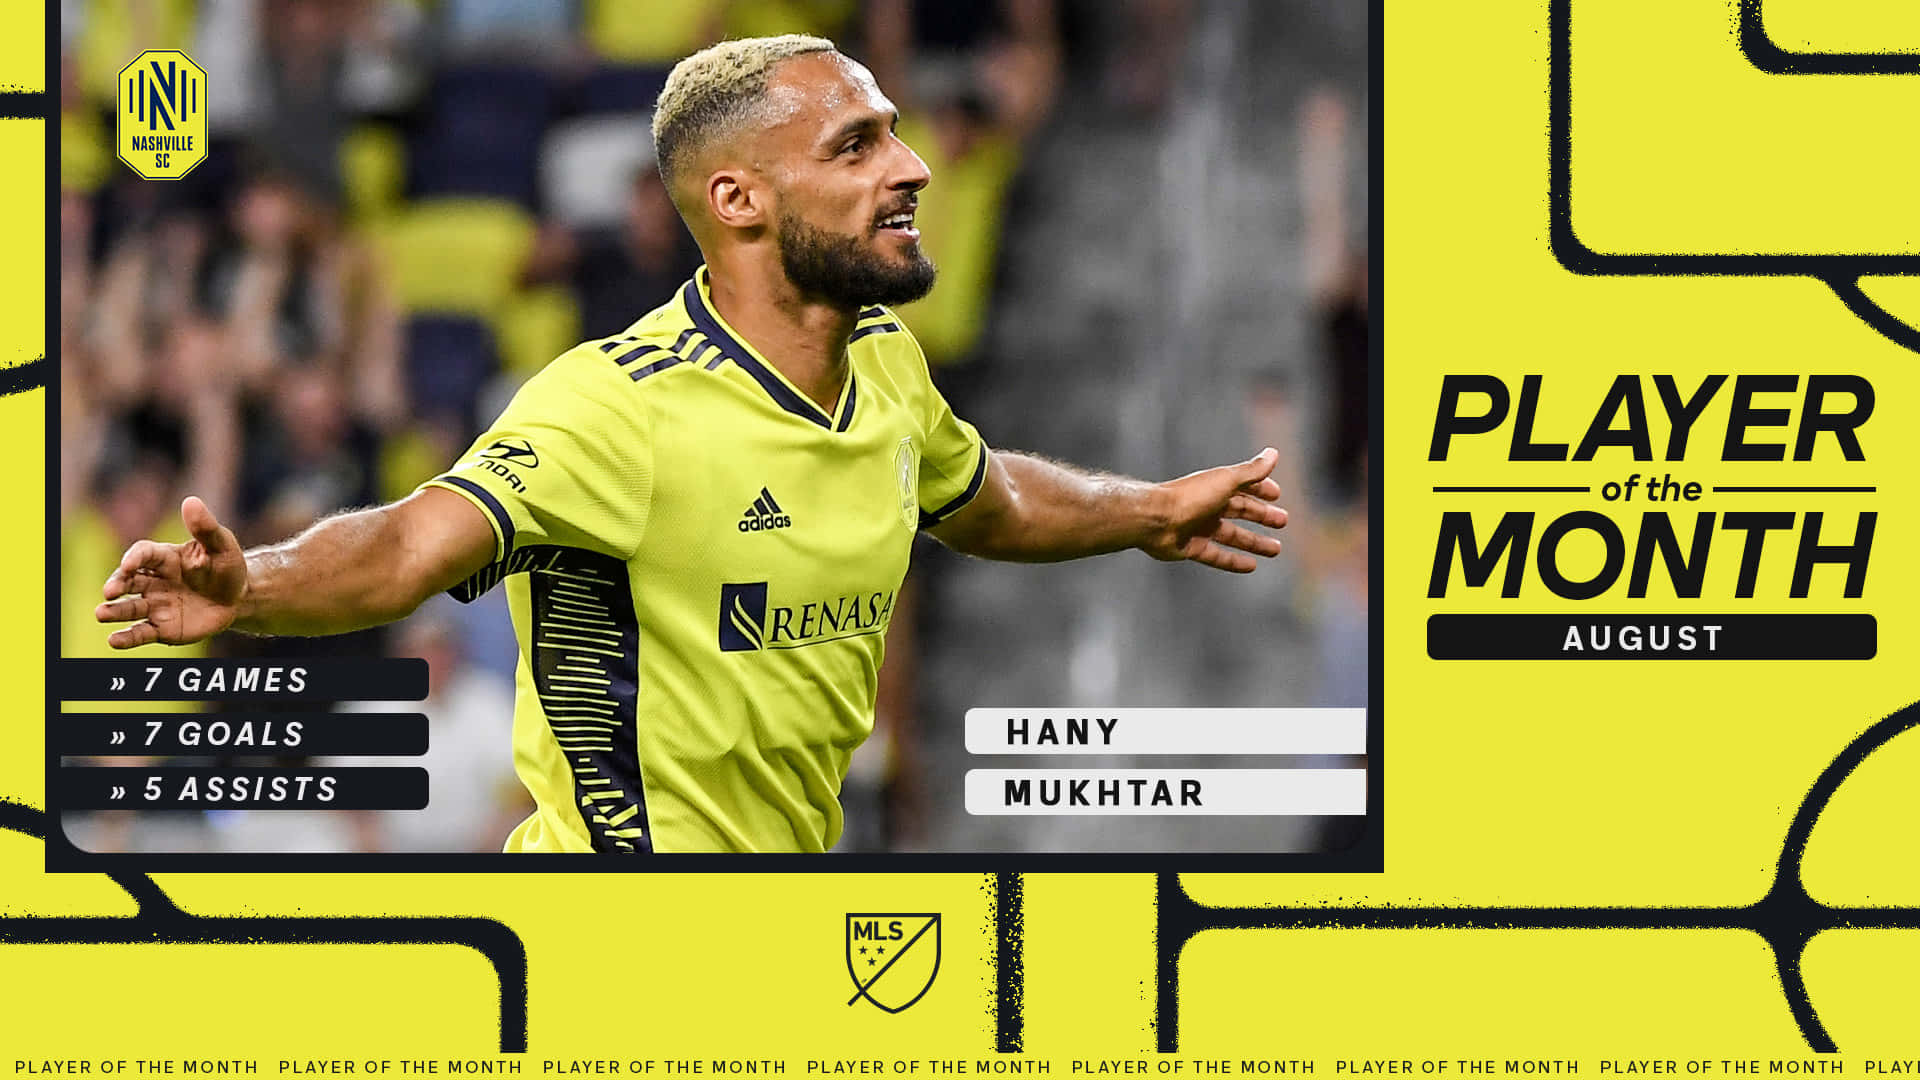 Download Hany Mukhtar Mls Player Of The Month Wallpaper | Wallpapers.com